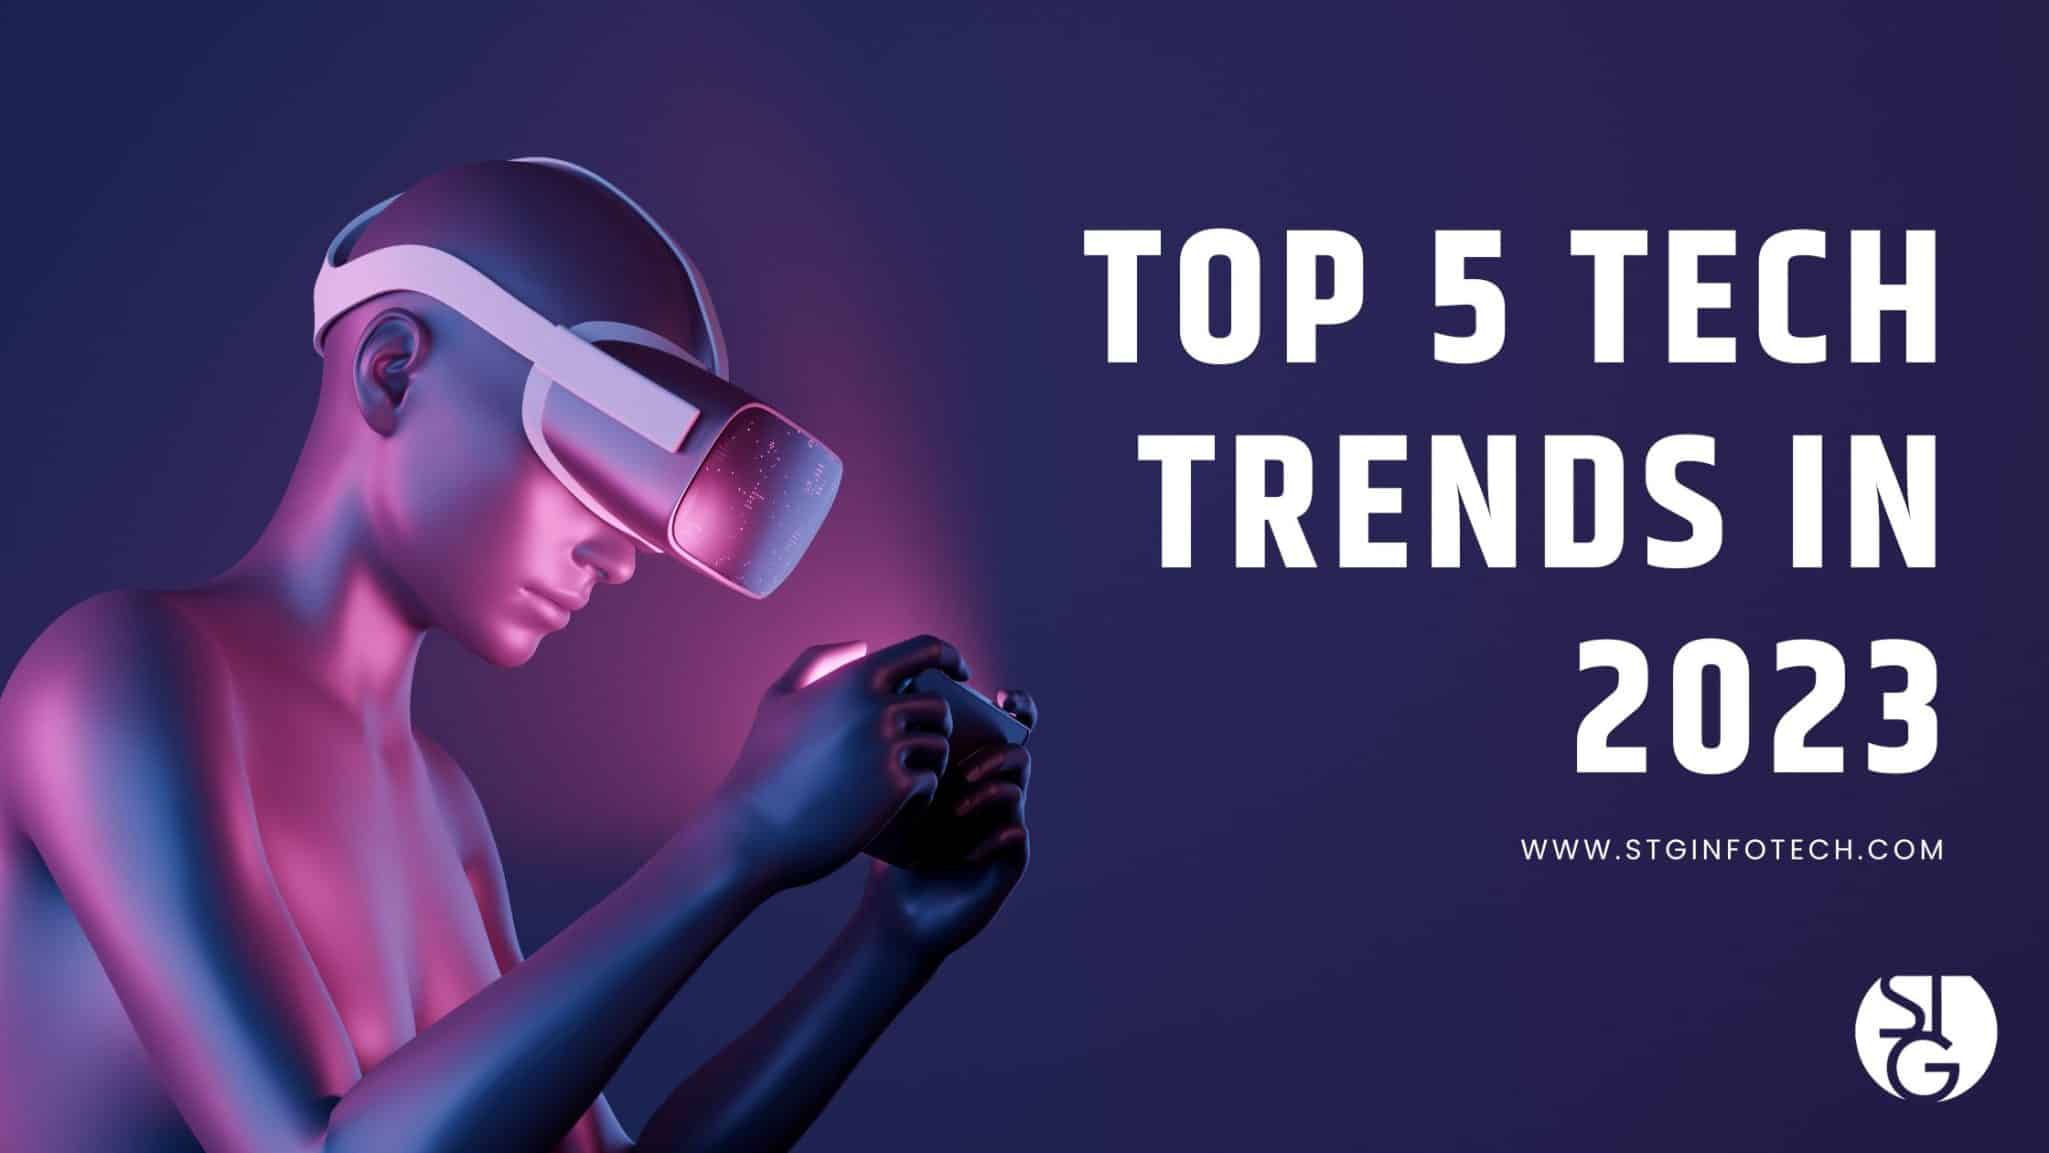 Top 5 Tech Trends To Look Out For In 2023